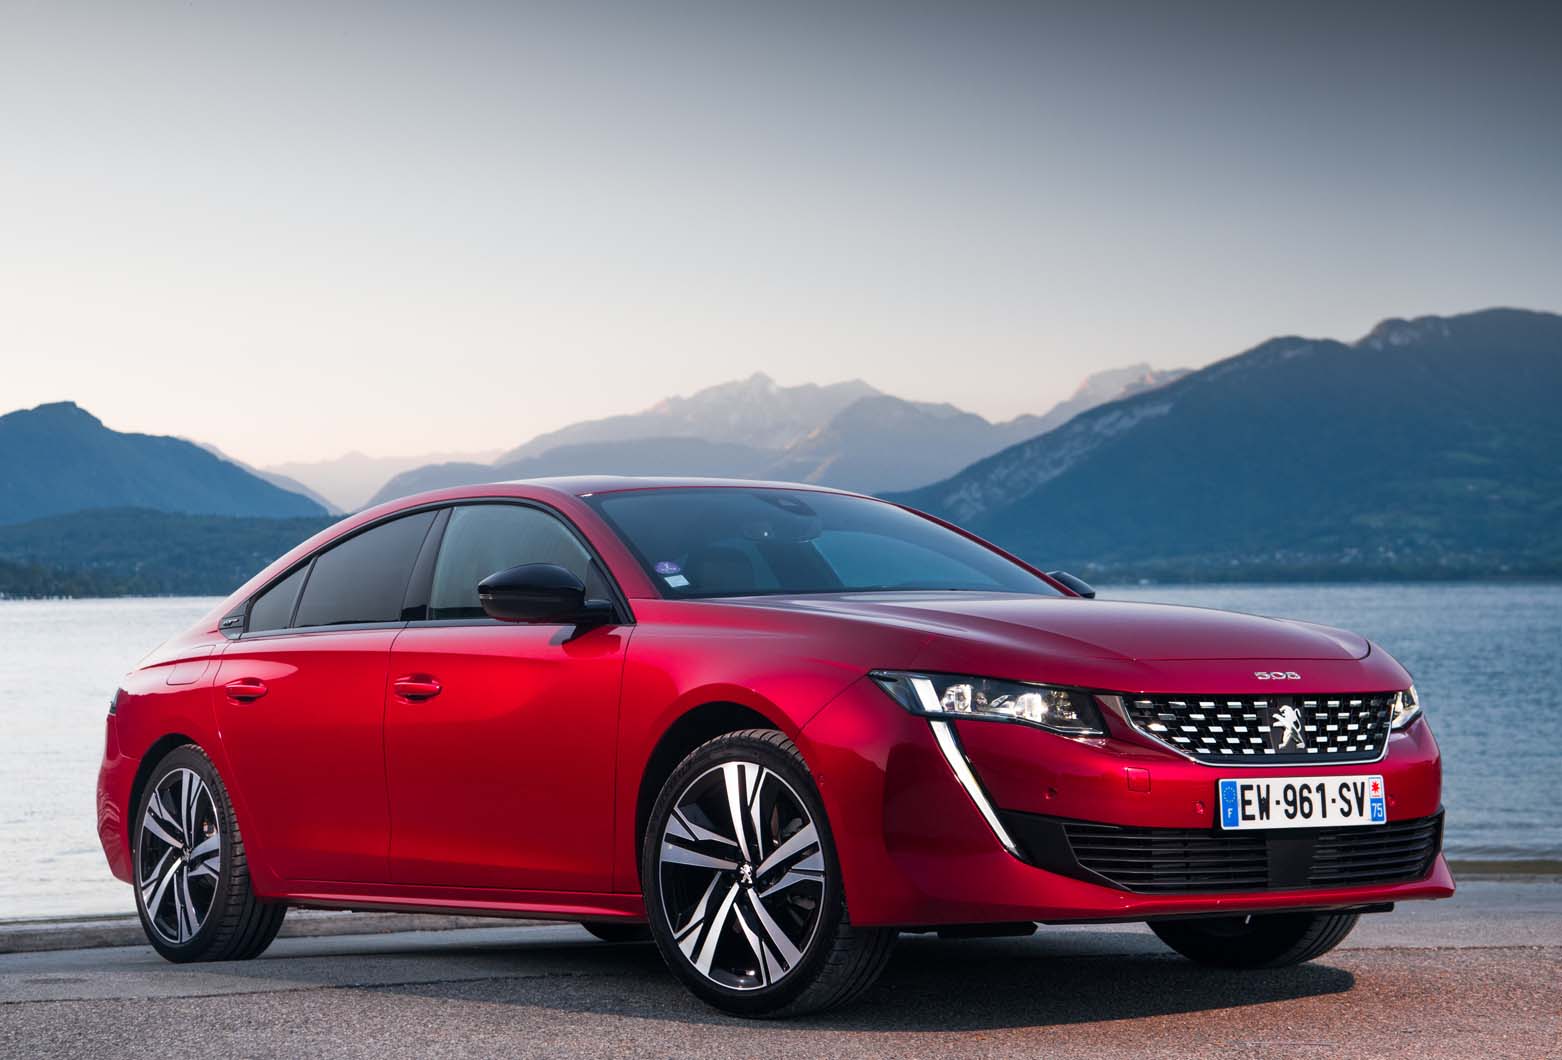 In France, the Future Looks Like the 2020 Peugeot 508 GT